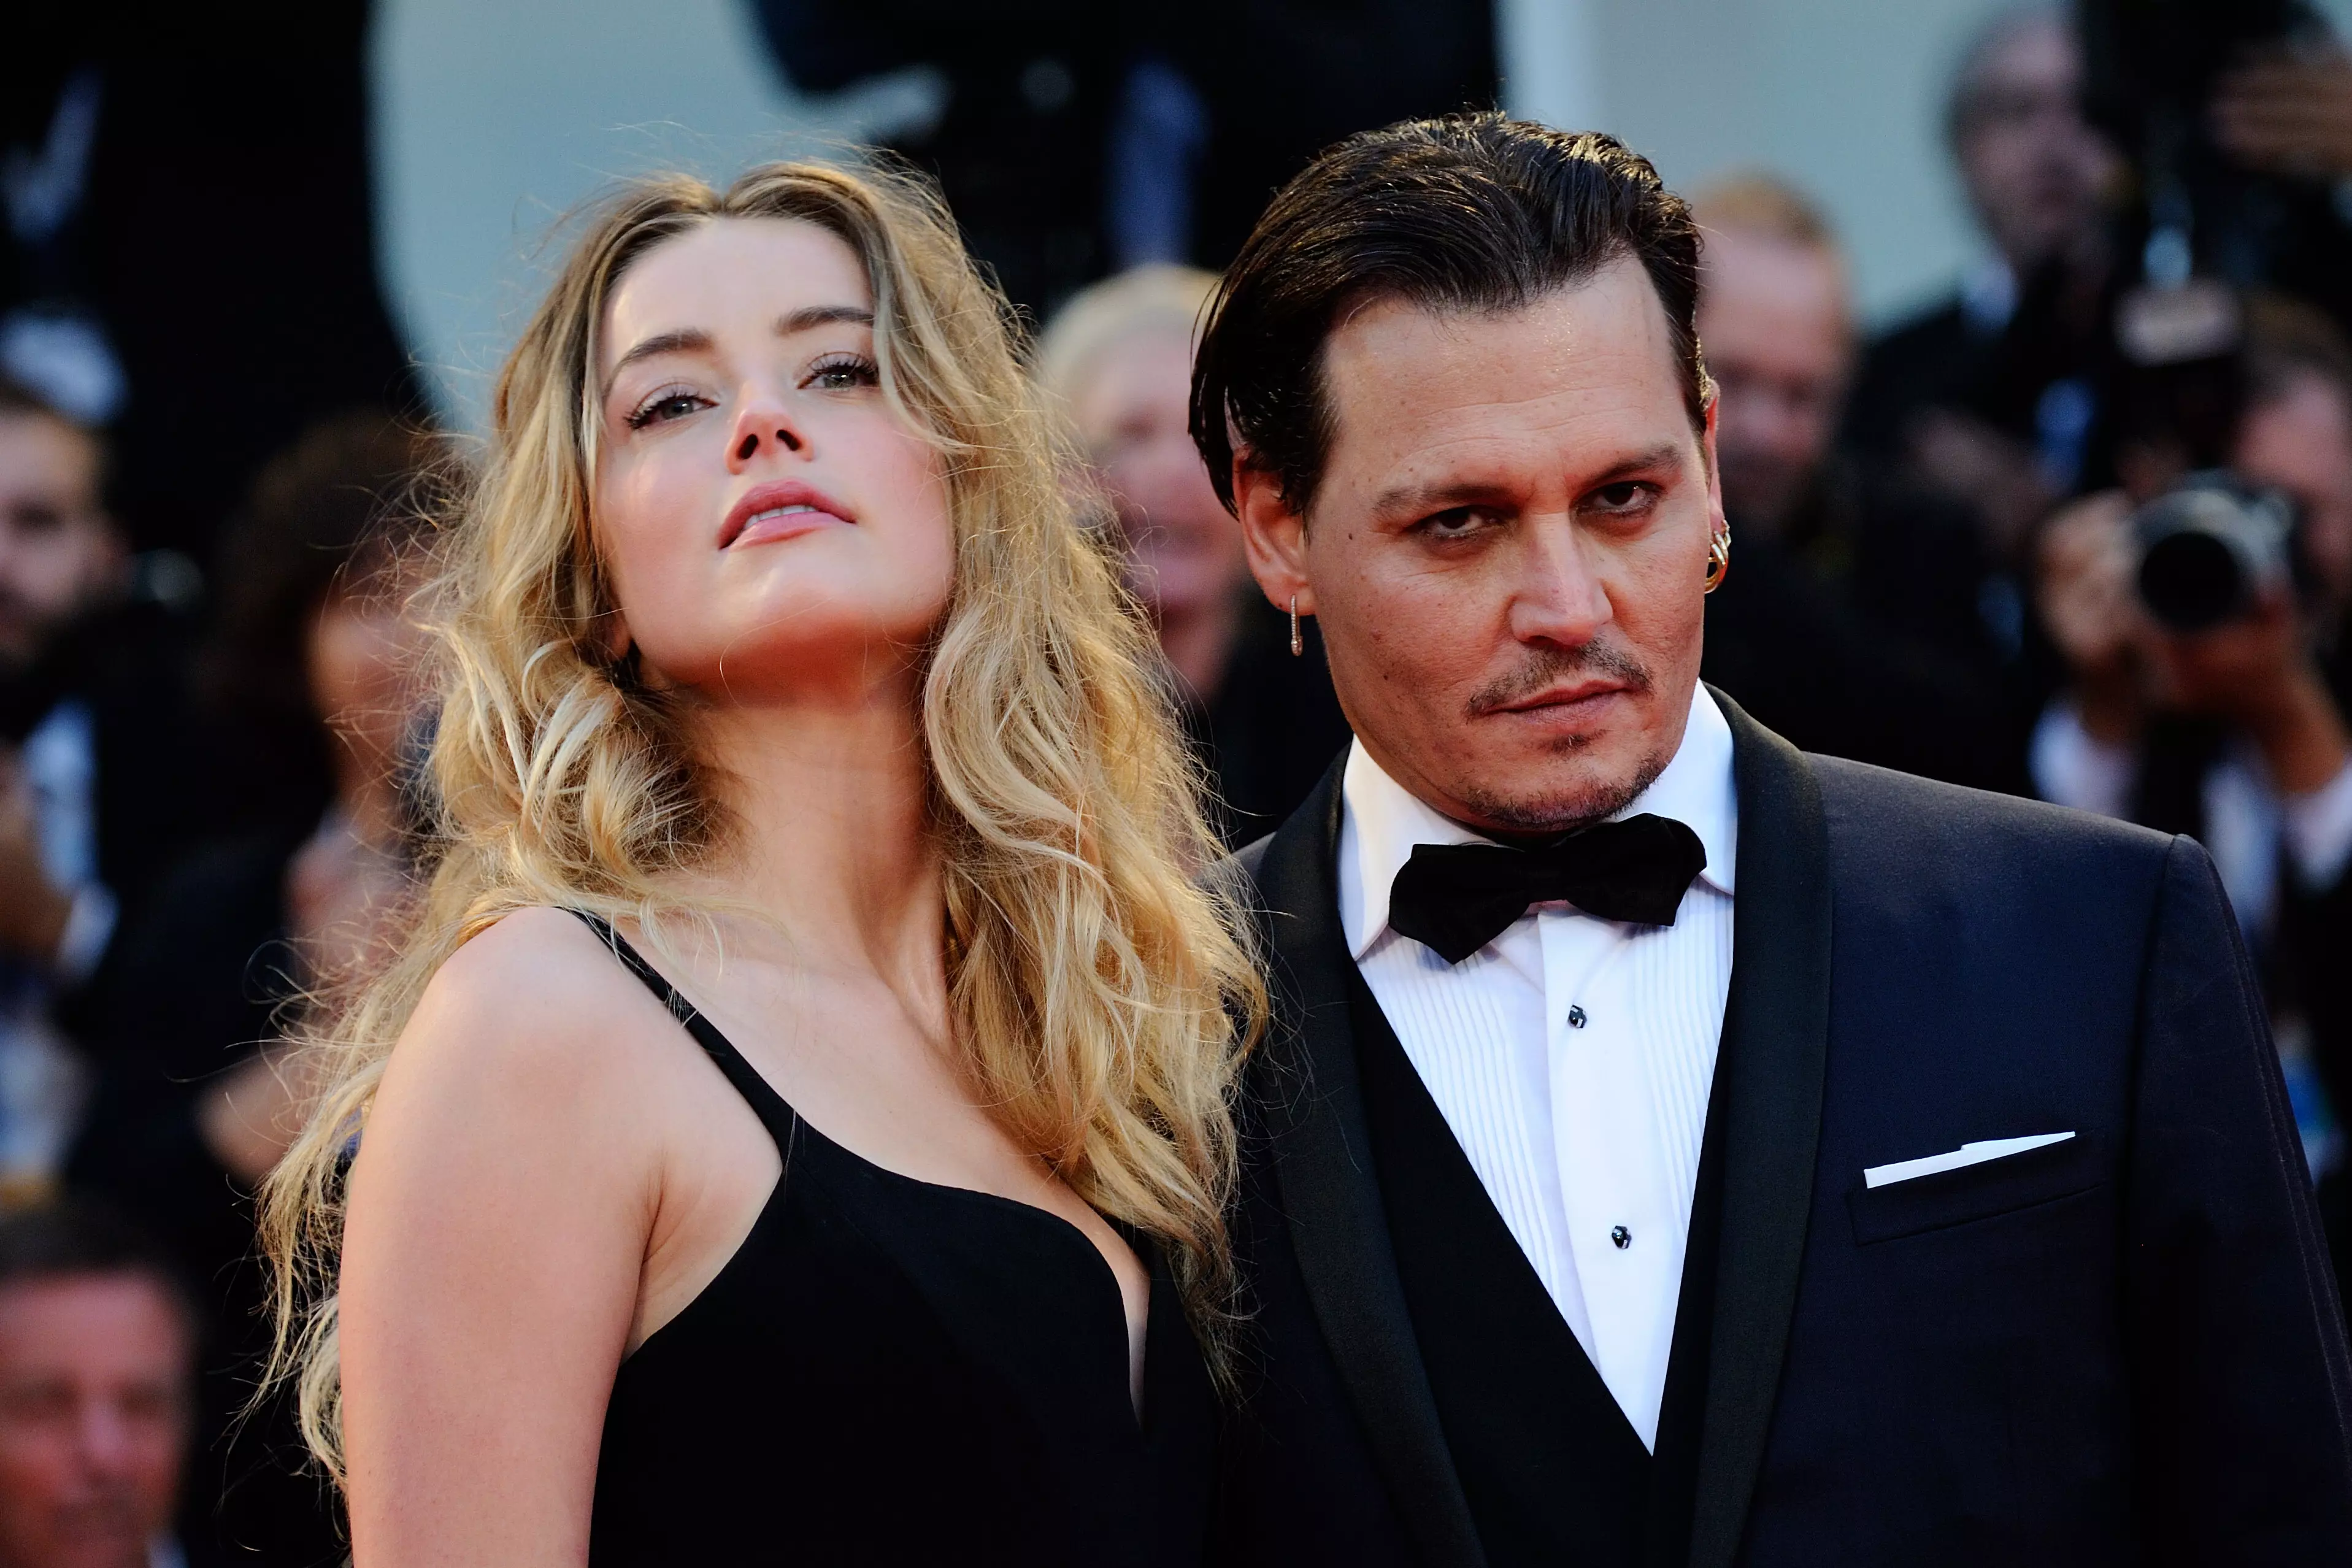 Depp and Heard before their divorce in 2016.